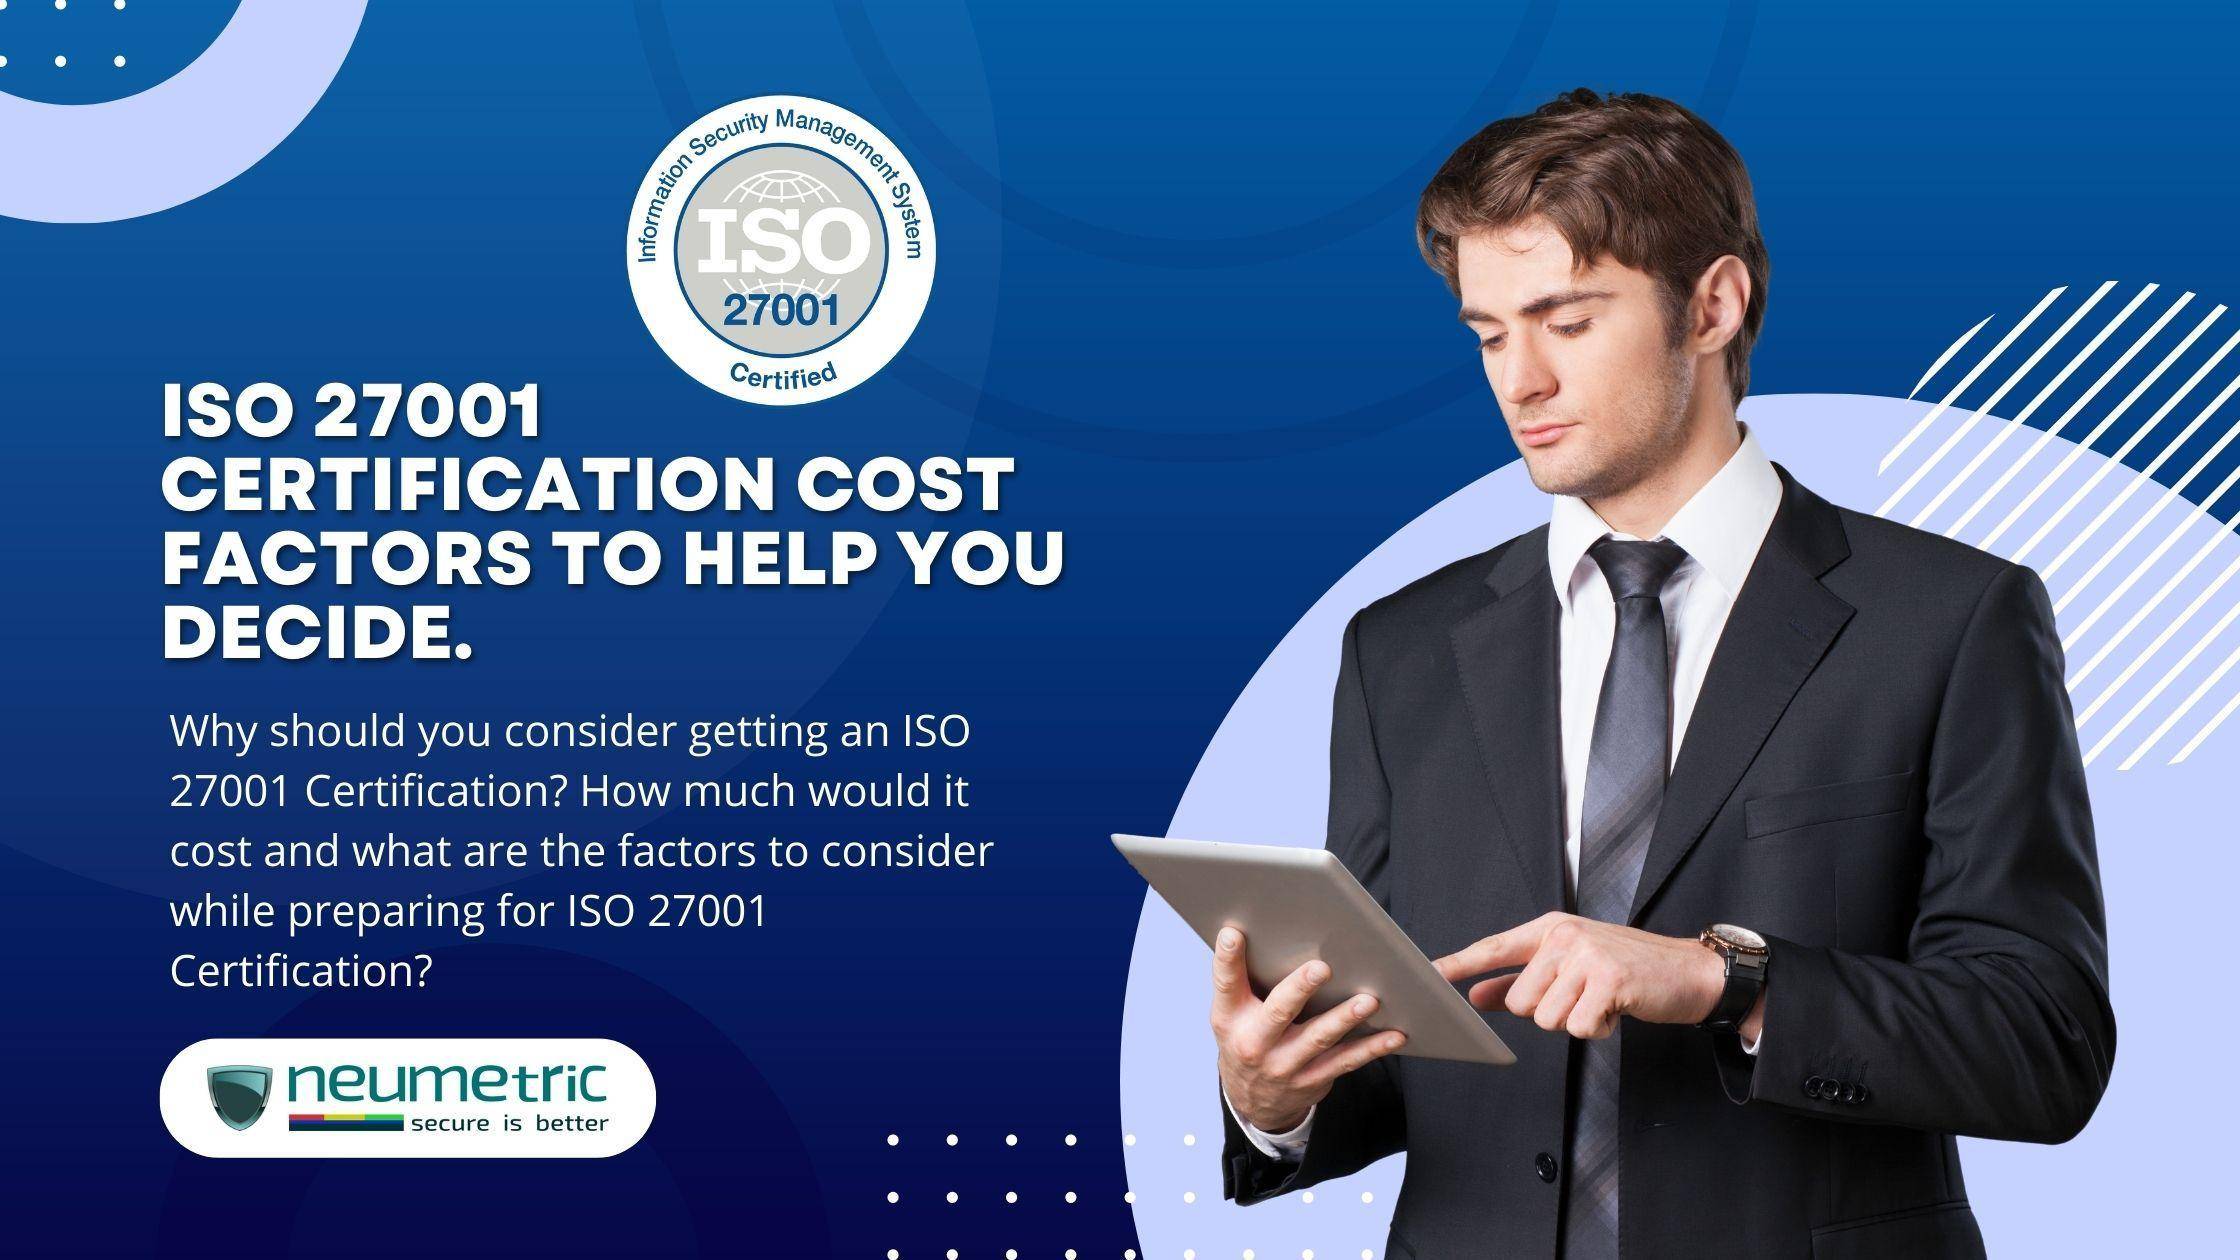 ISO 27001 Certification Cost Factors to Help You Decide